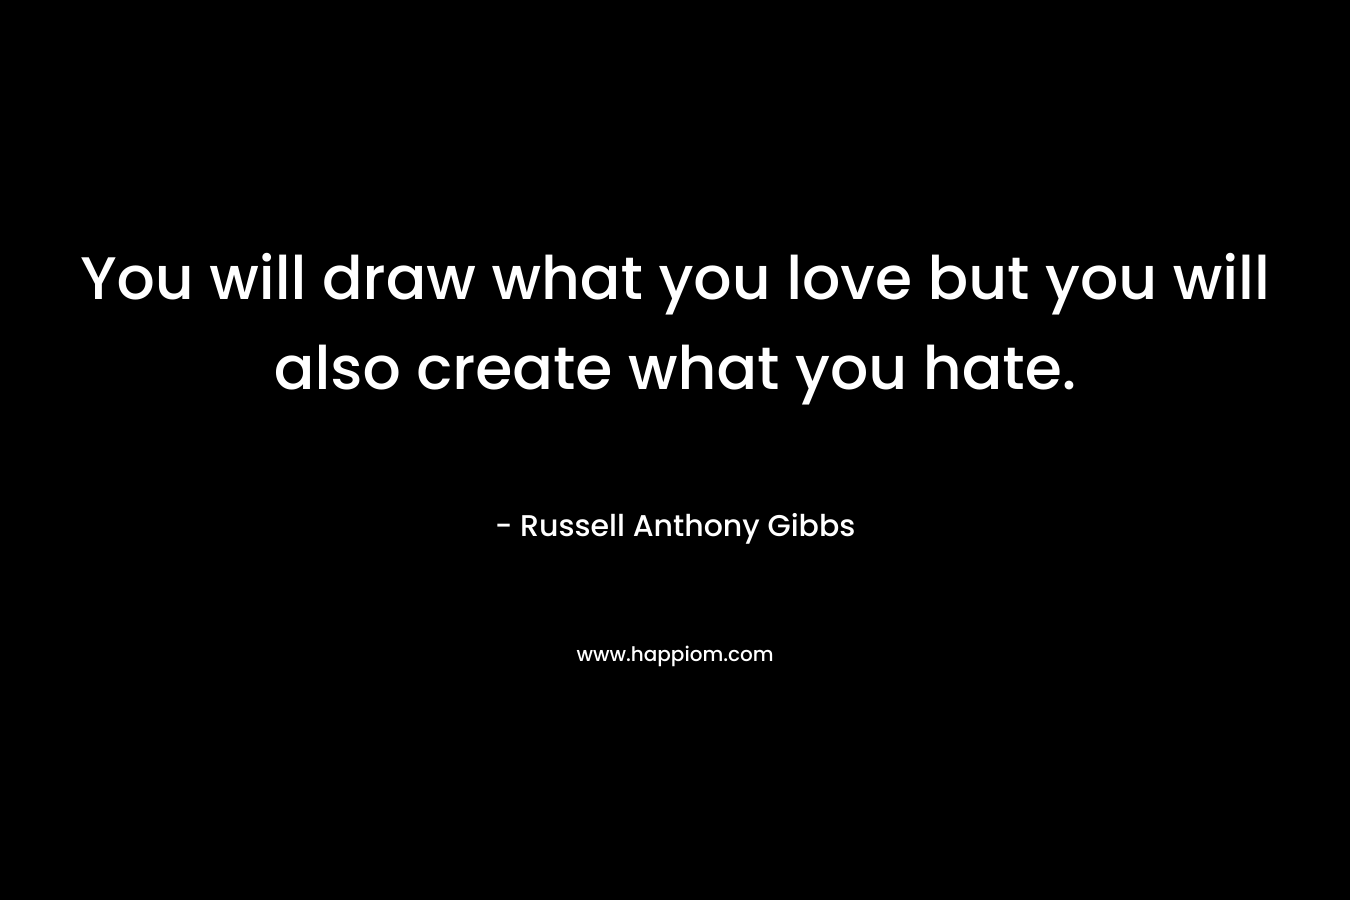 You will draw what you love but you will also create what you hate.